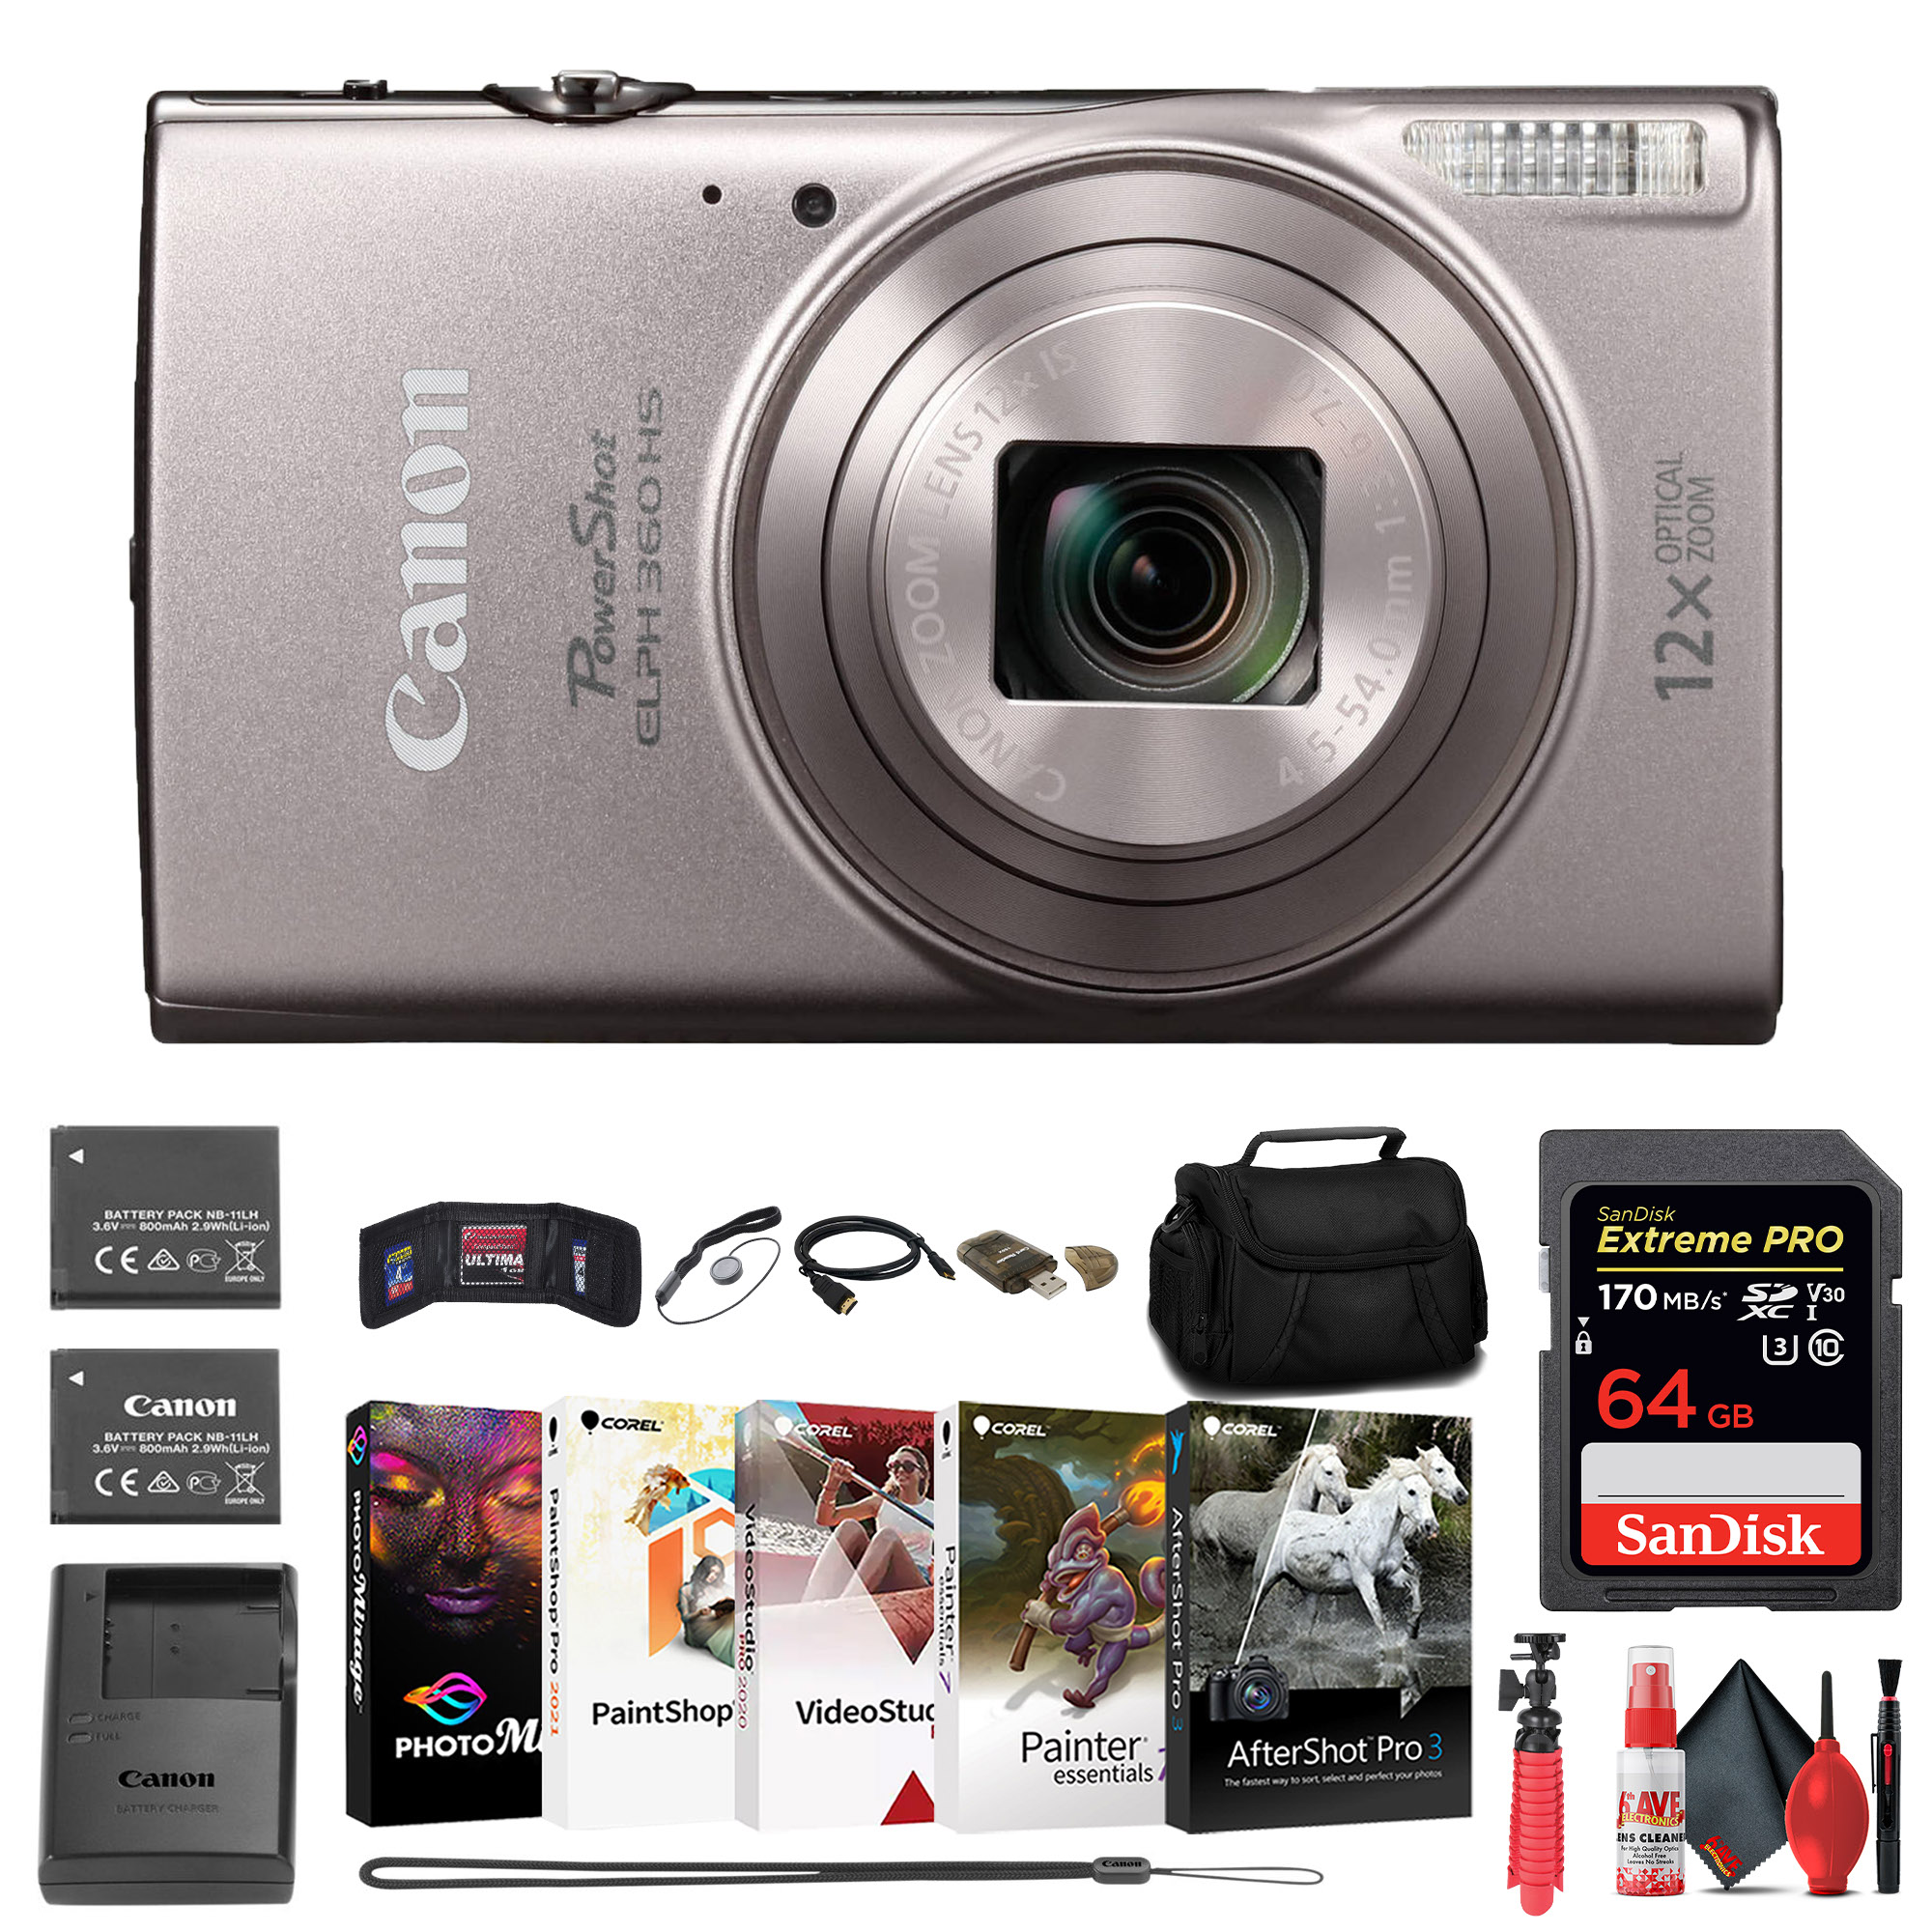 Canon PowerShot ELPH 360 HS Digital Camera (Silver) (1078C001) + 64GB Memory Card + NB11L Battery + Case + Charger + Card Reader + Corel Photo Software + HDMI Cable + Flex Tripod + More - image 1 of 8